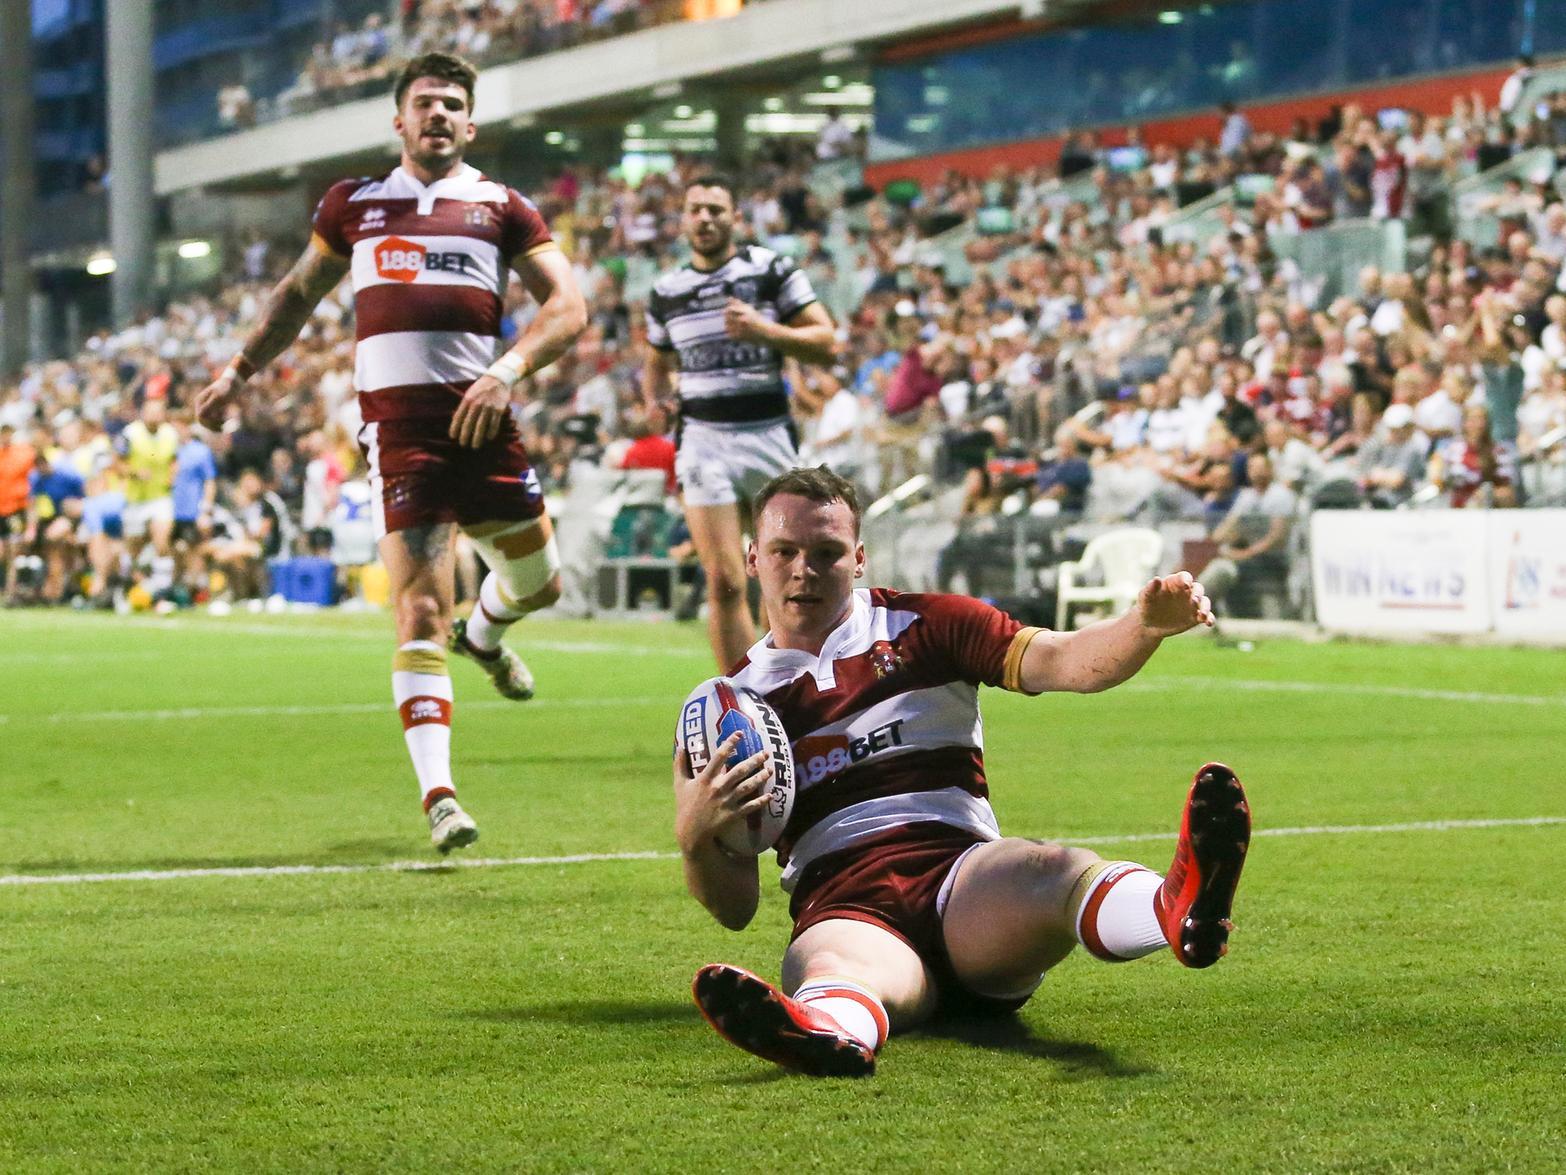 Wigan staged a home match against Hull in Wollongong in 2018  the first Super League game to be played outside of Europe. Liam Marshall lit up a 24-10 victory.